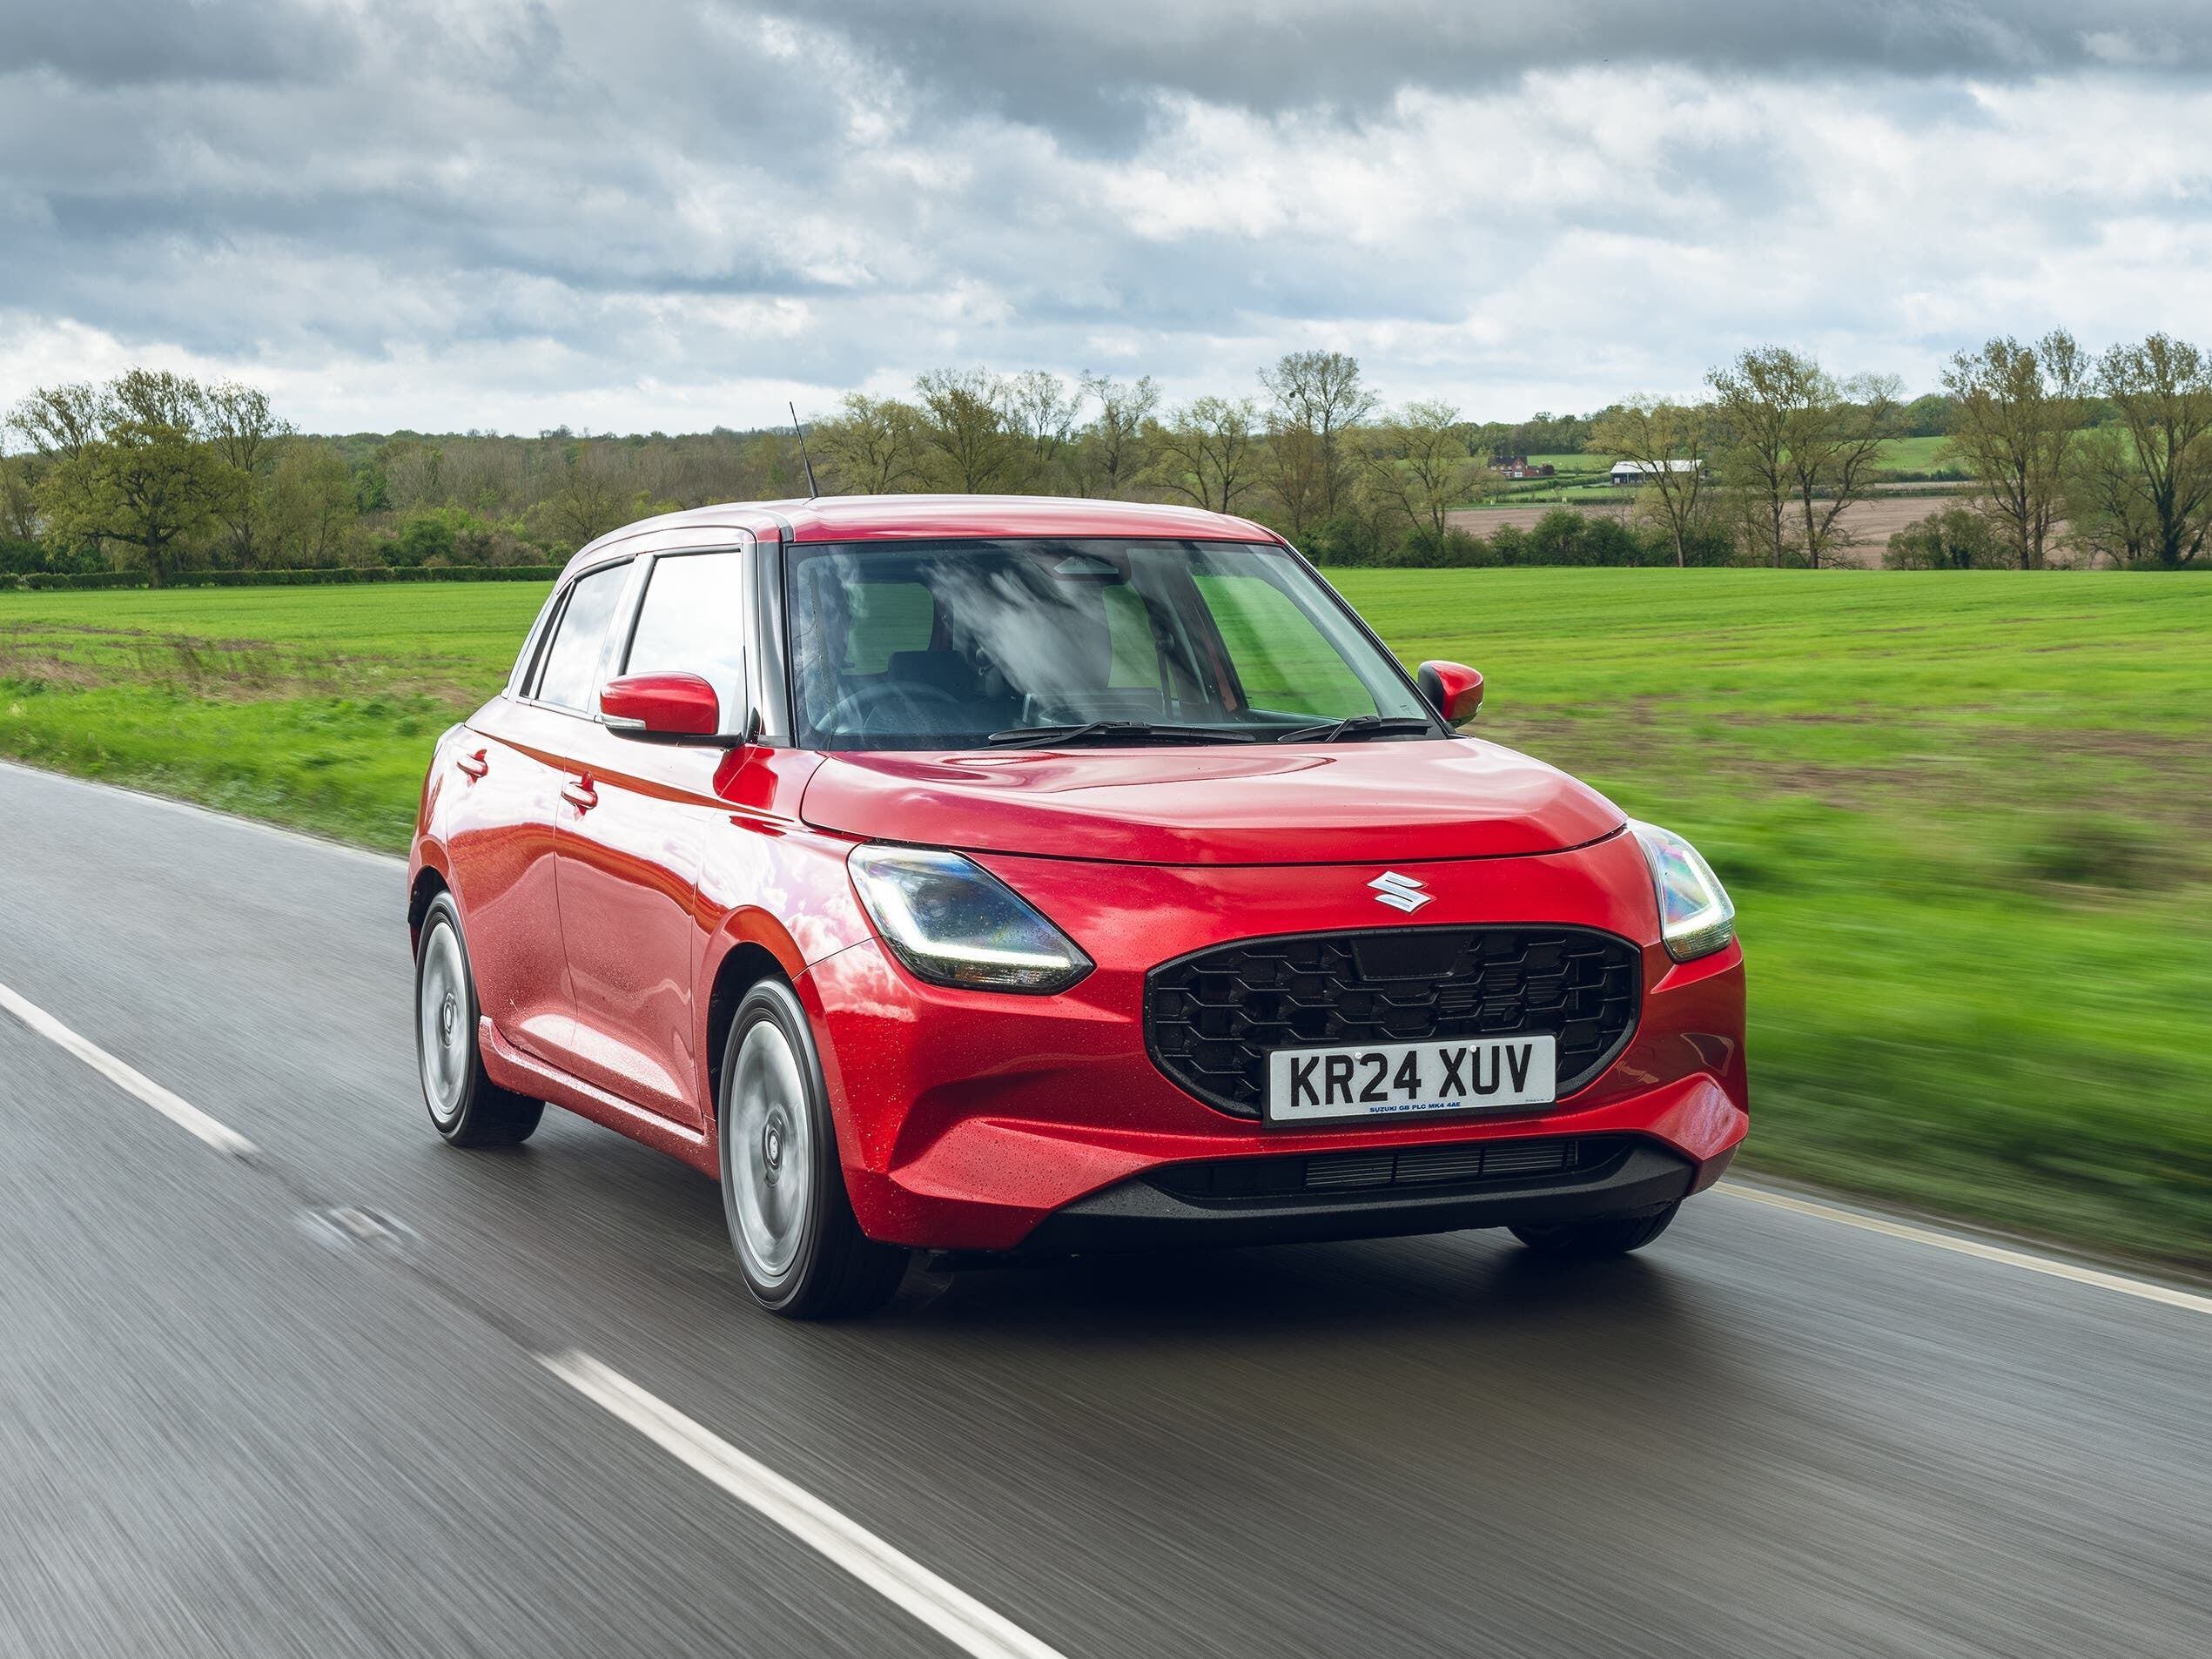 UK drive: Suzuki is still taking the supermini class seriously with the new Swift